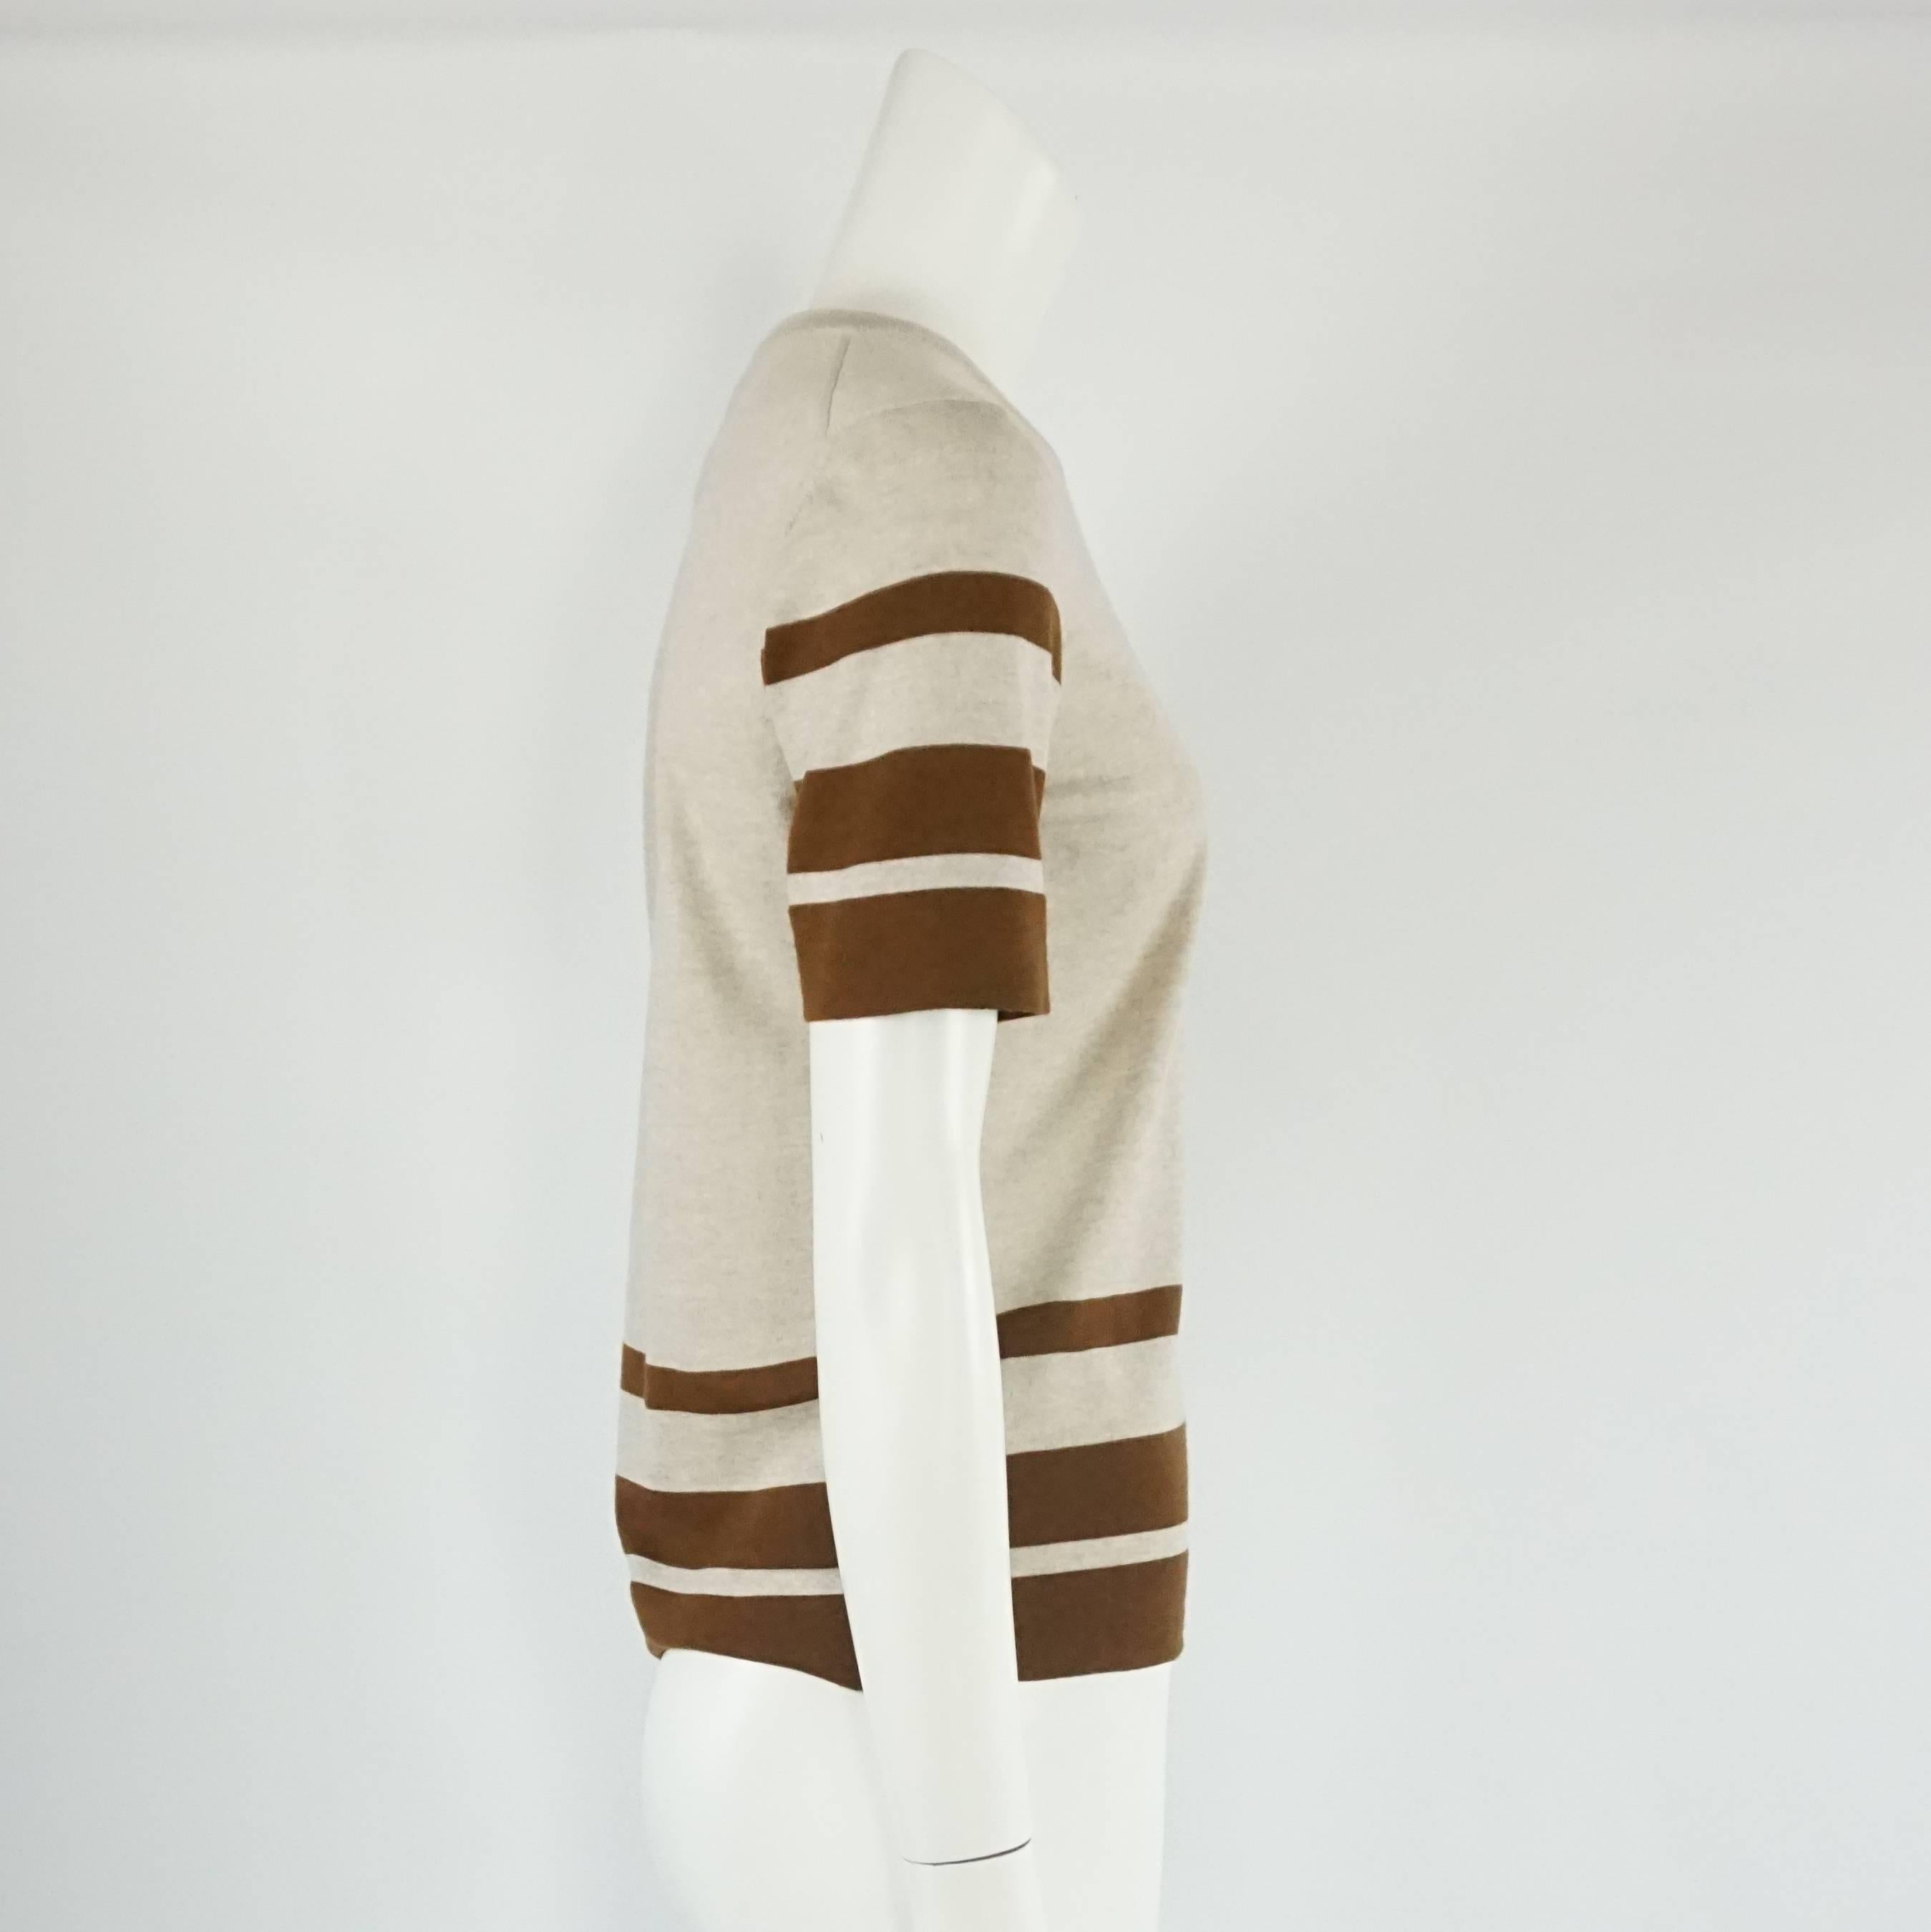 This Salvatore Ferragamo grey and brown virgin wool top has a classic-equestrian feel. The blouse is round necked with stripes on the sleeves and bottom and a small Ferragamo metal logo on the bottom. The piece is in excellent condition with a